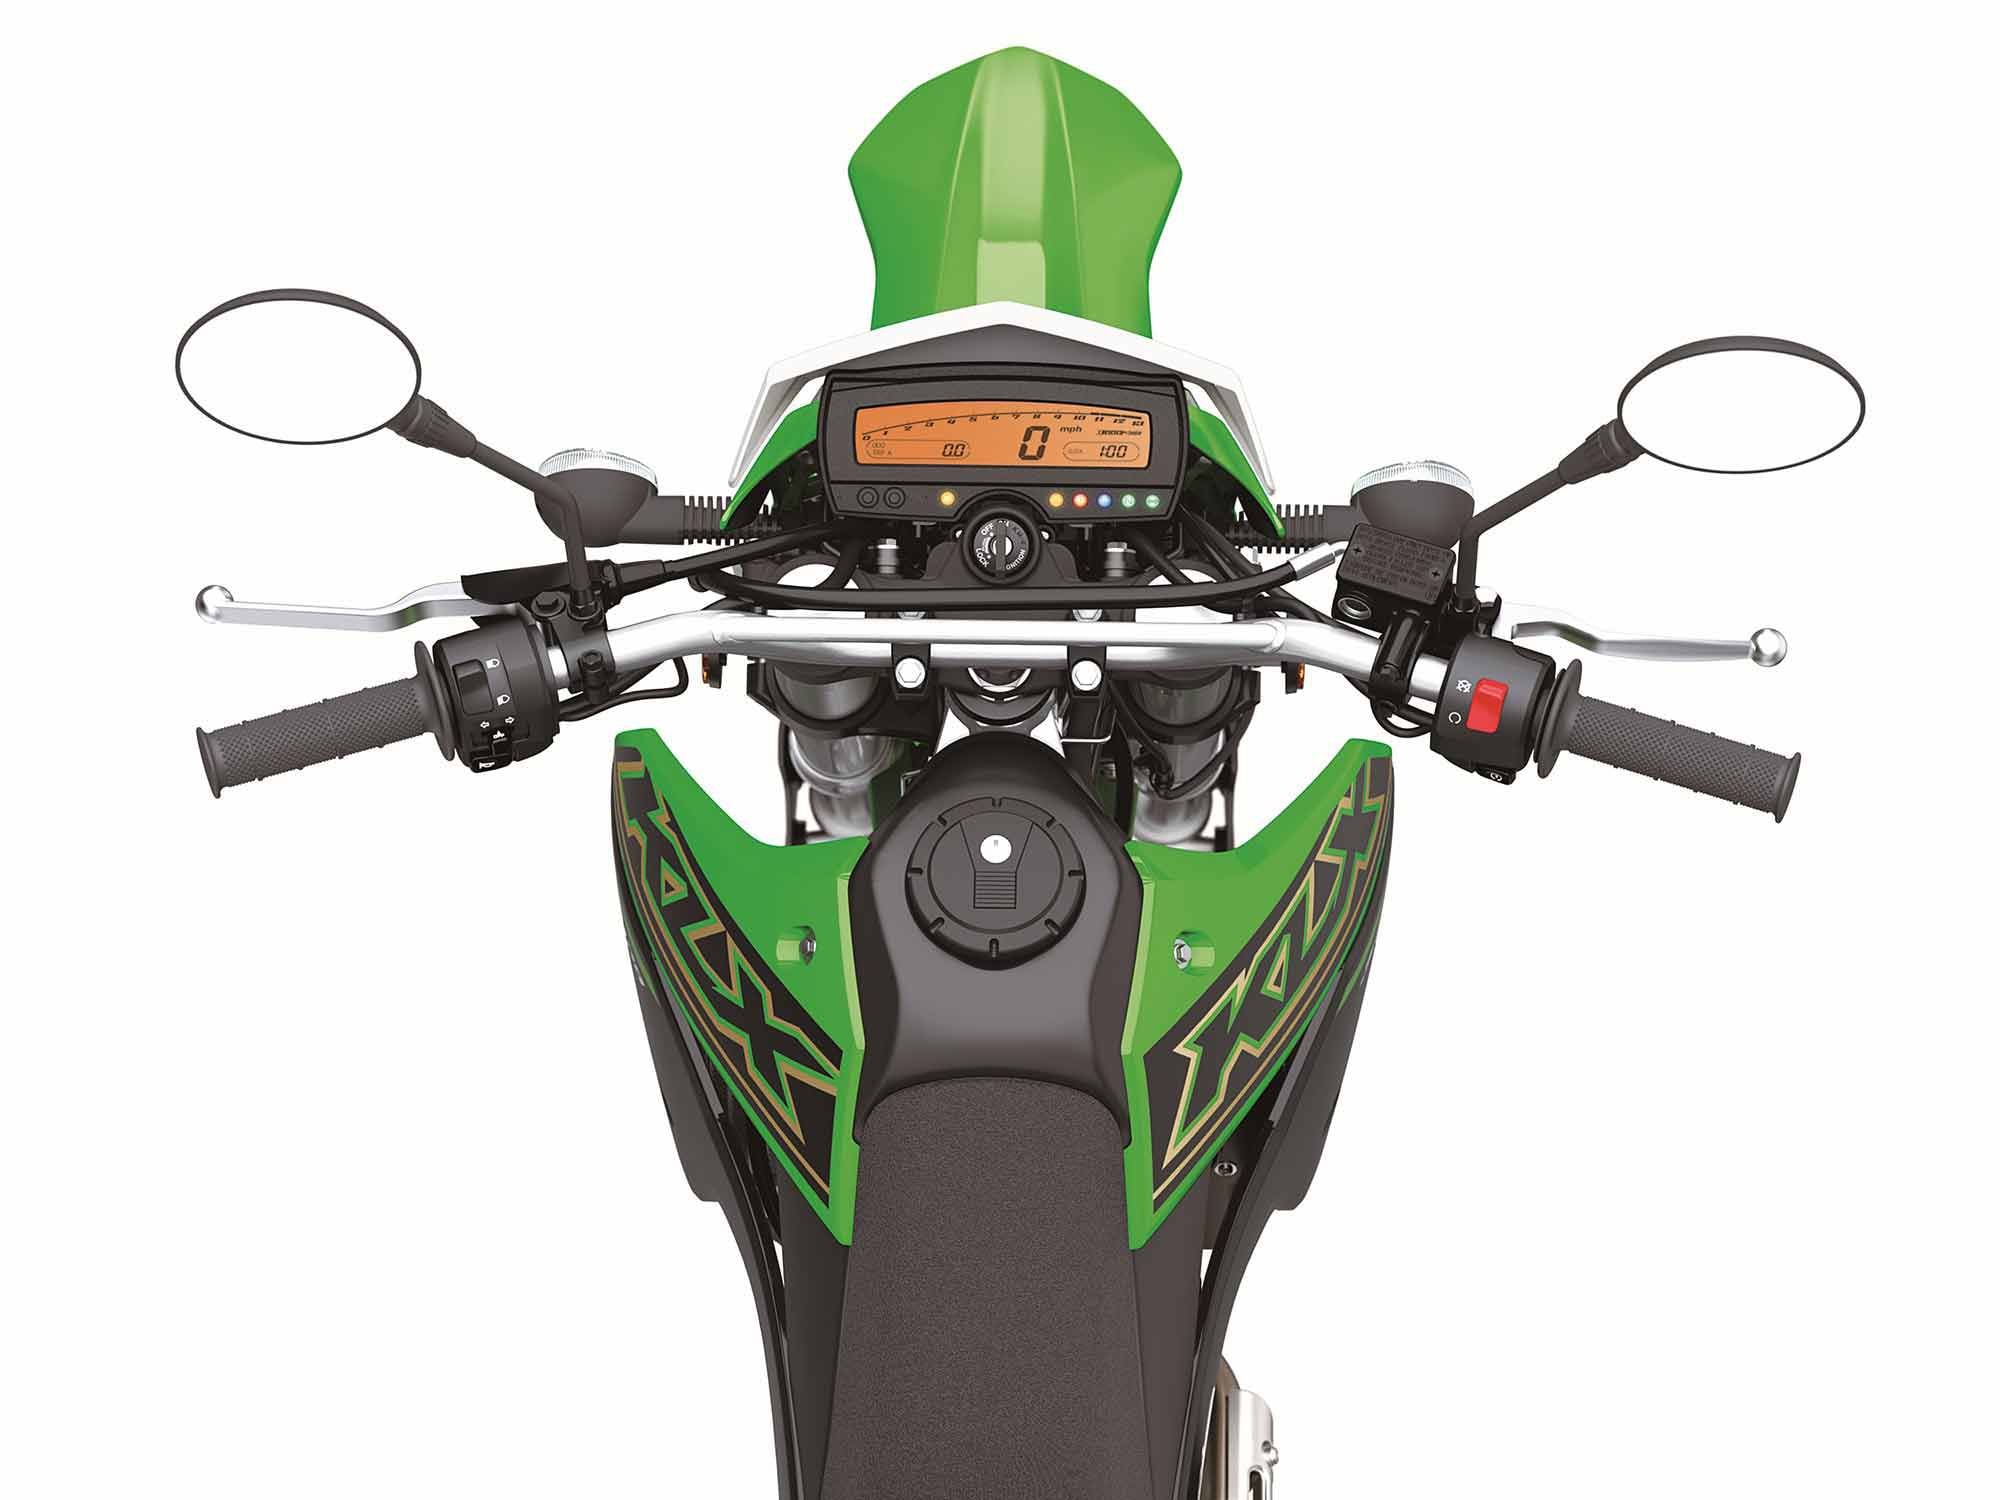 The KLX300 features a basic LCD dash.